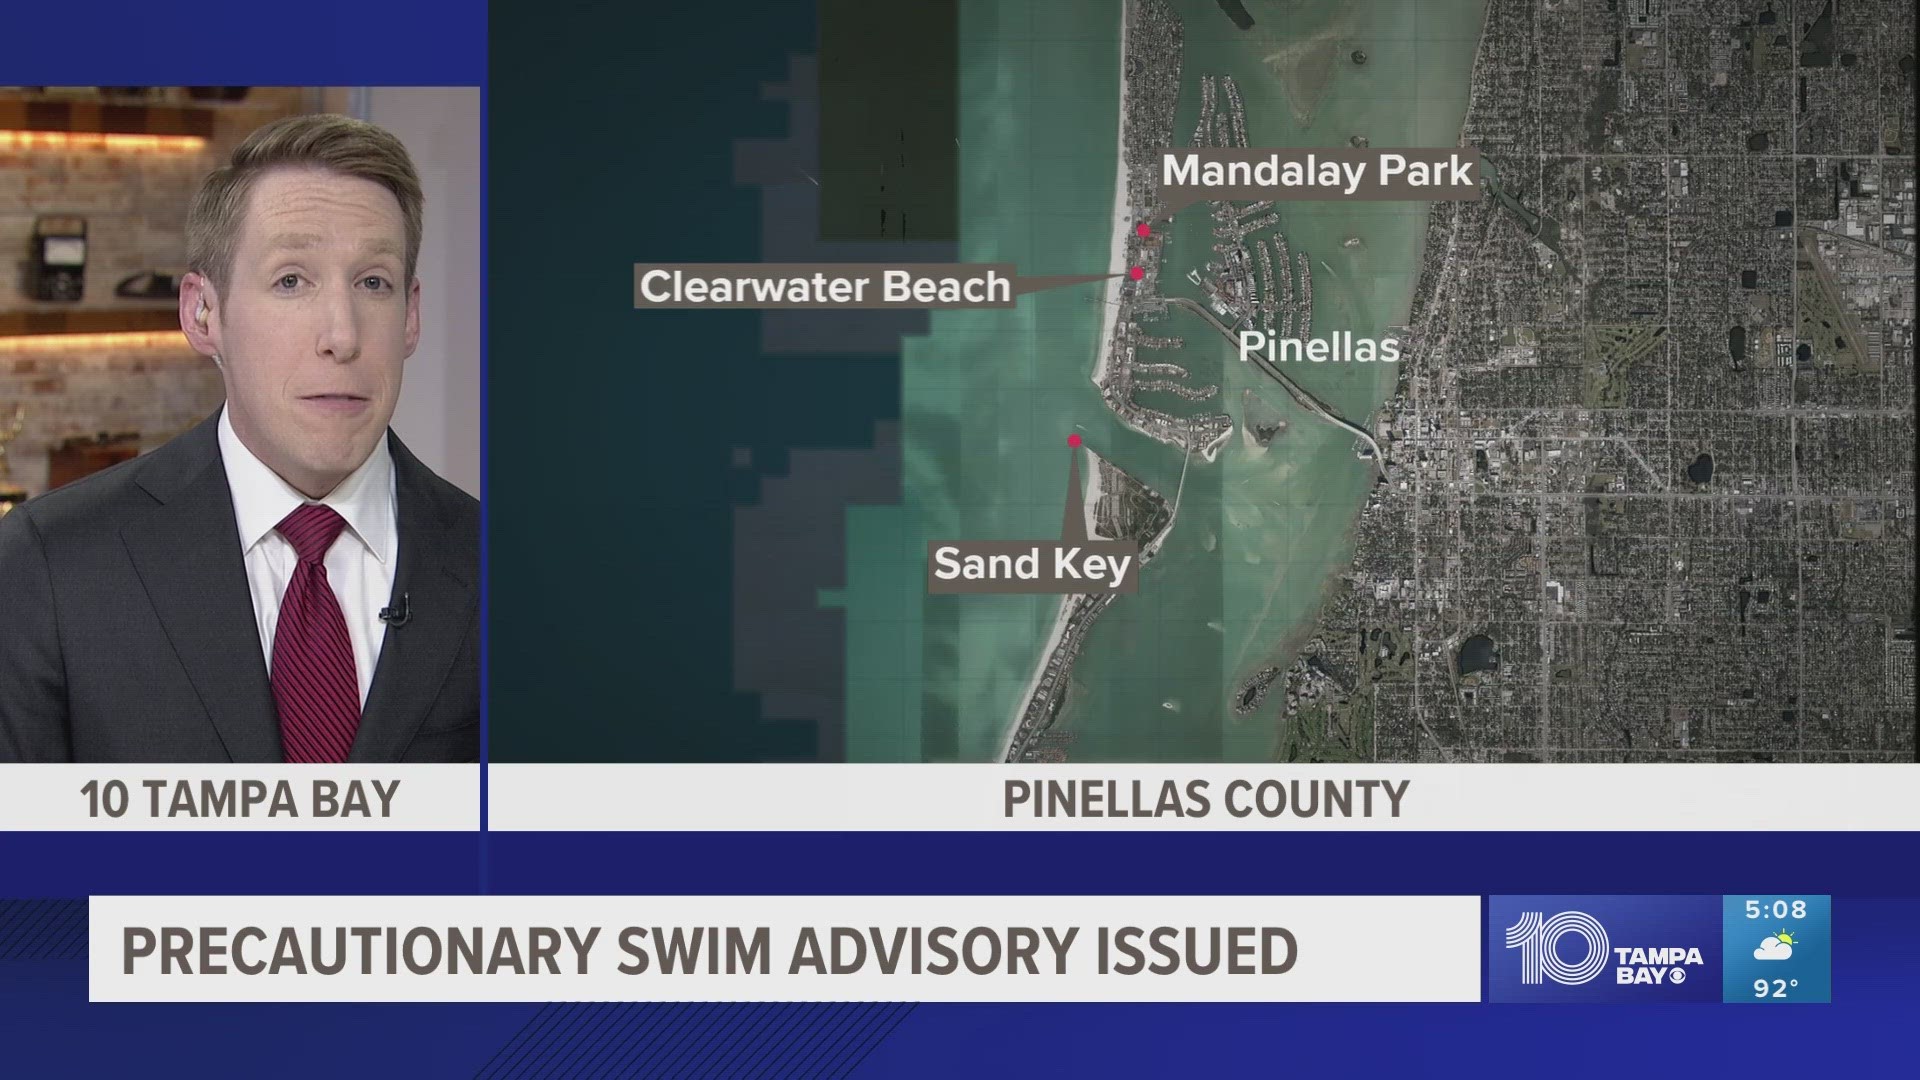 After major tropical systems, the water quality at area beaches tends to be less than desirable for a swim.